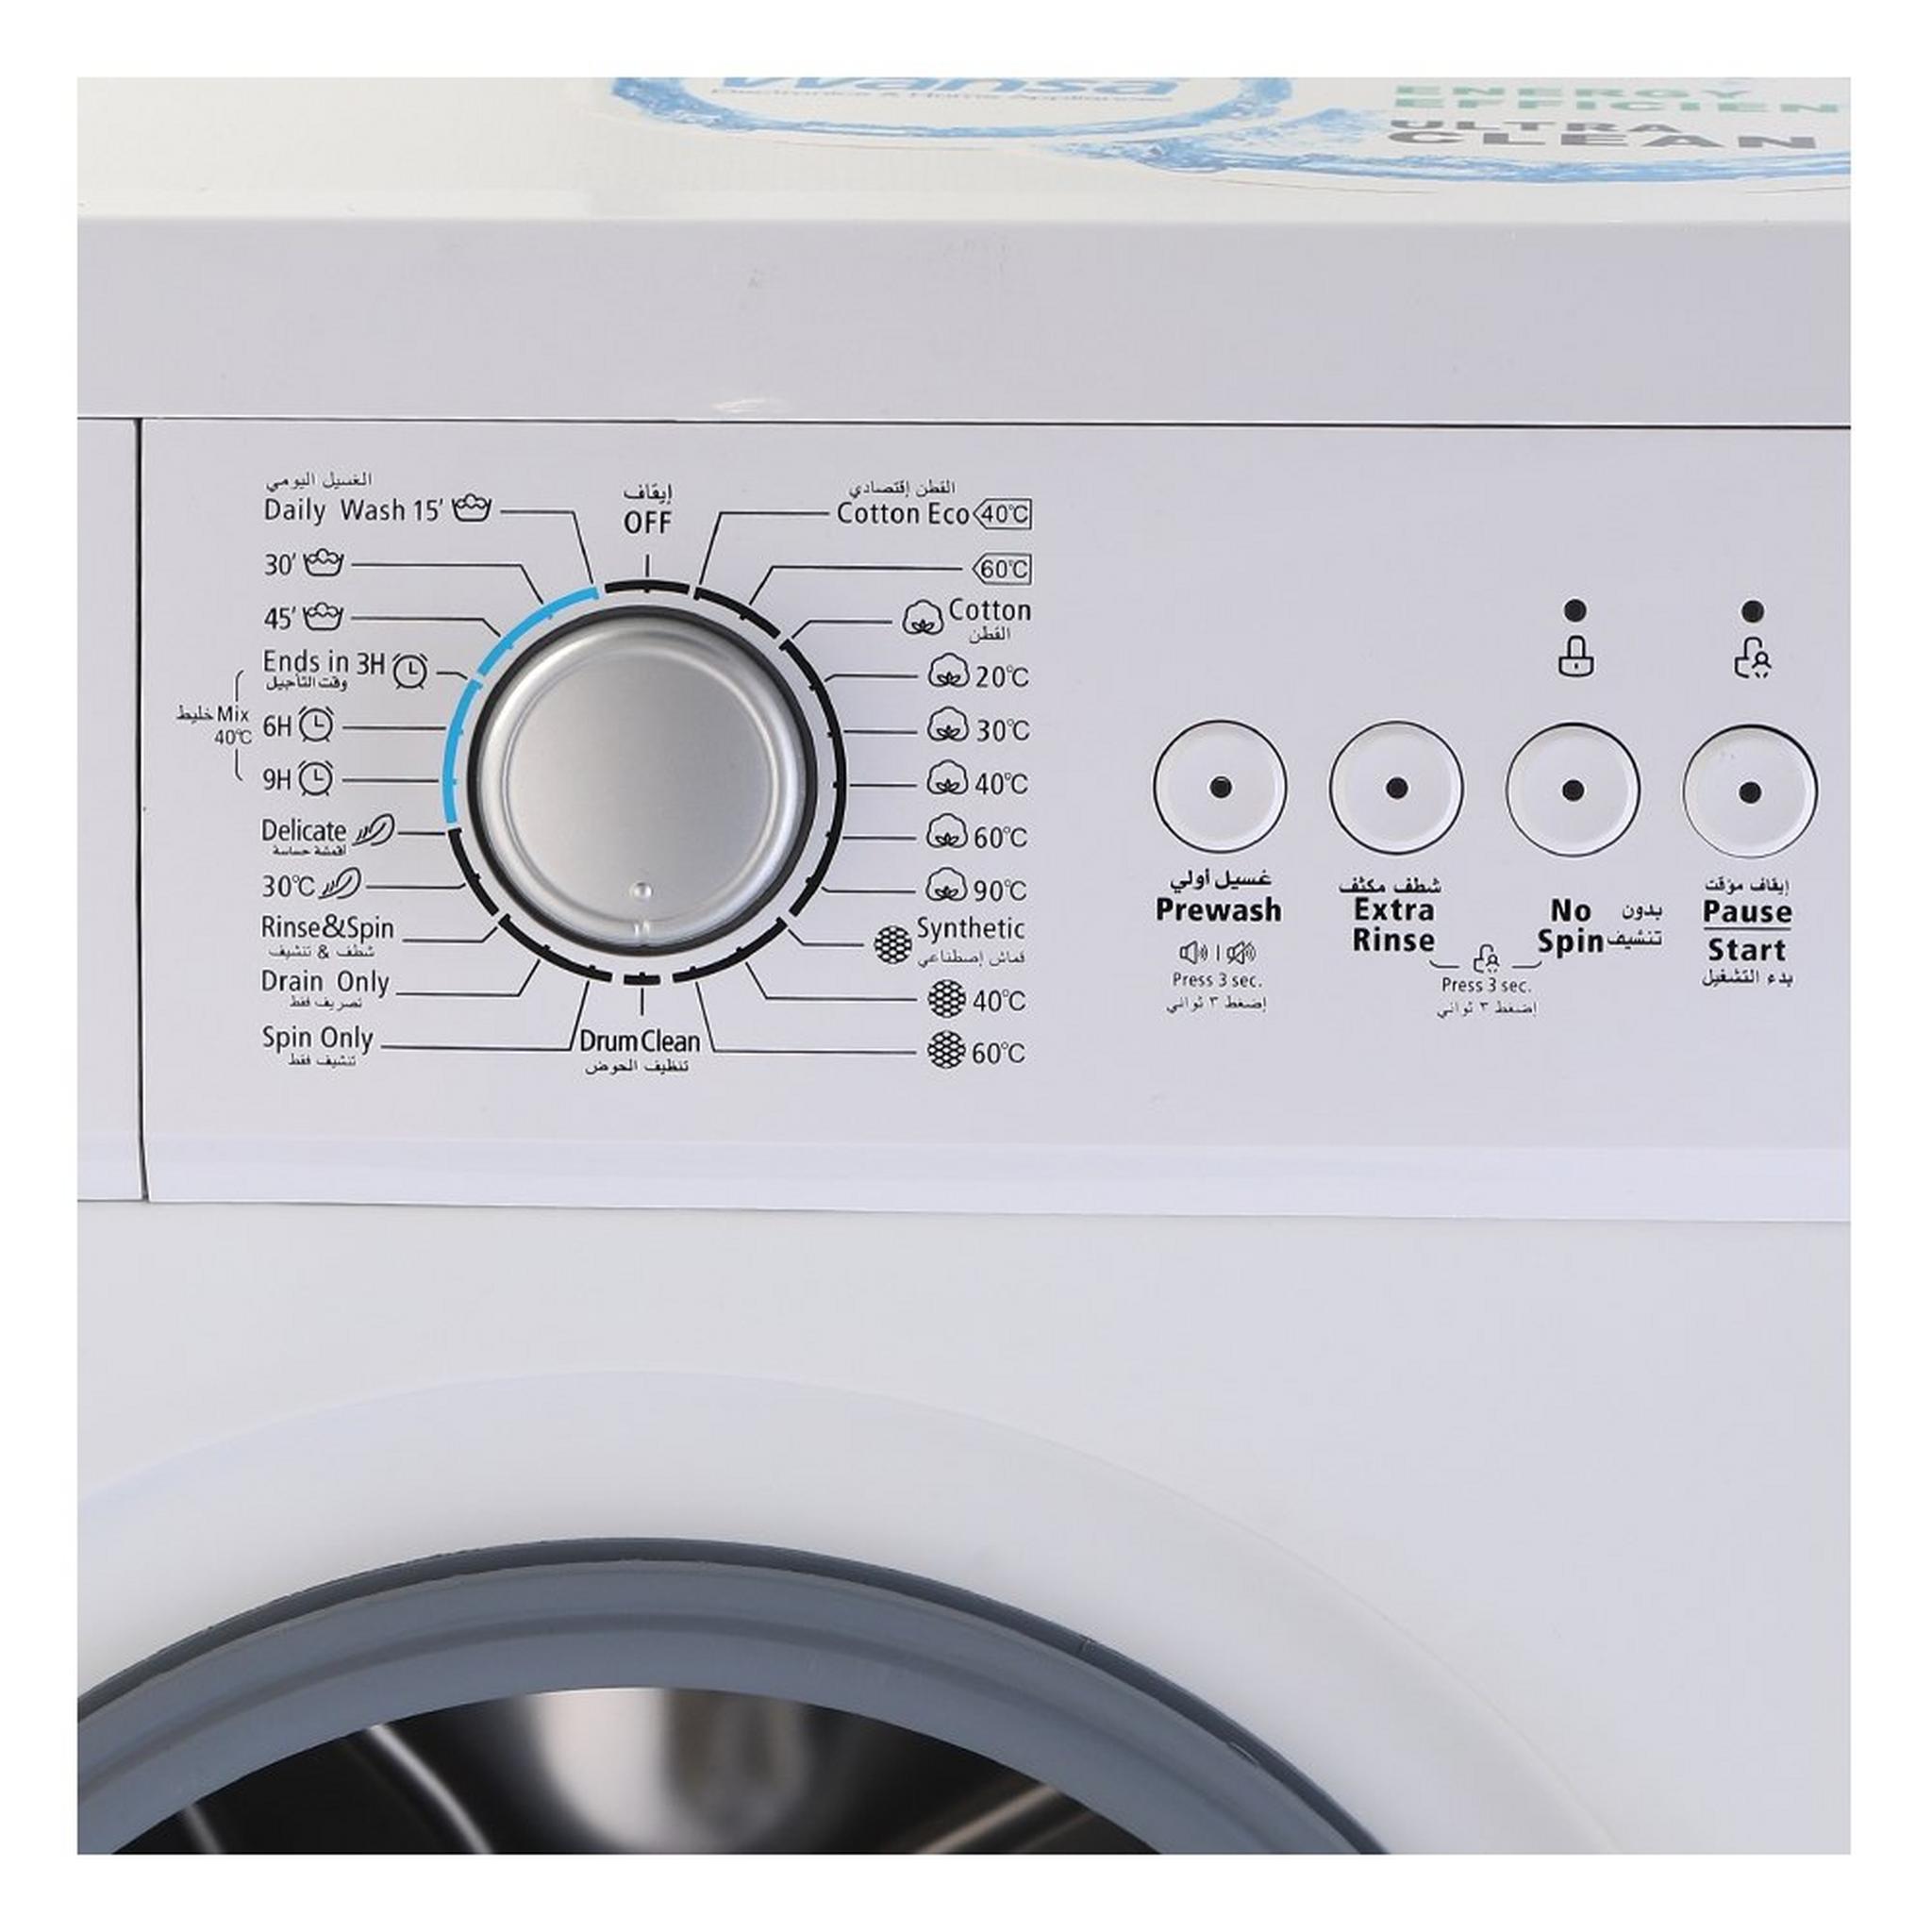 Wansa Gold 6KG Front Load Washer - White (WGFL60105WHSLV-C10)